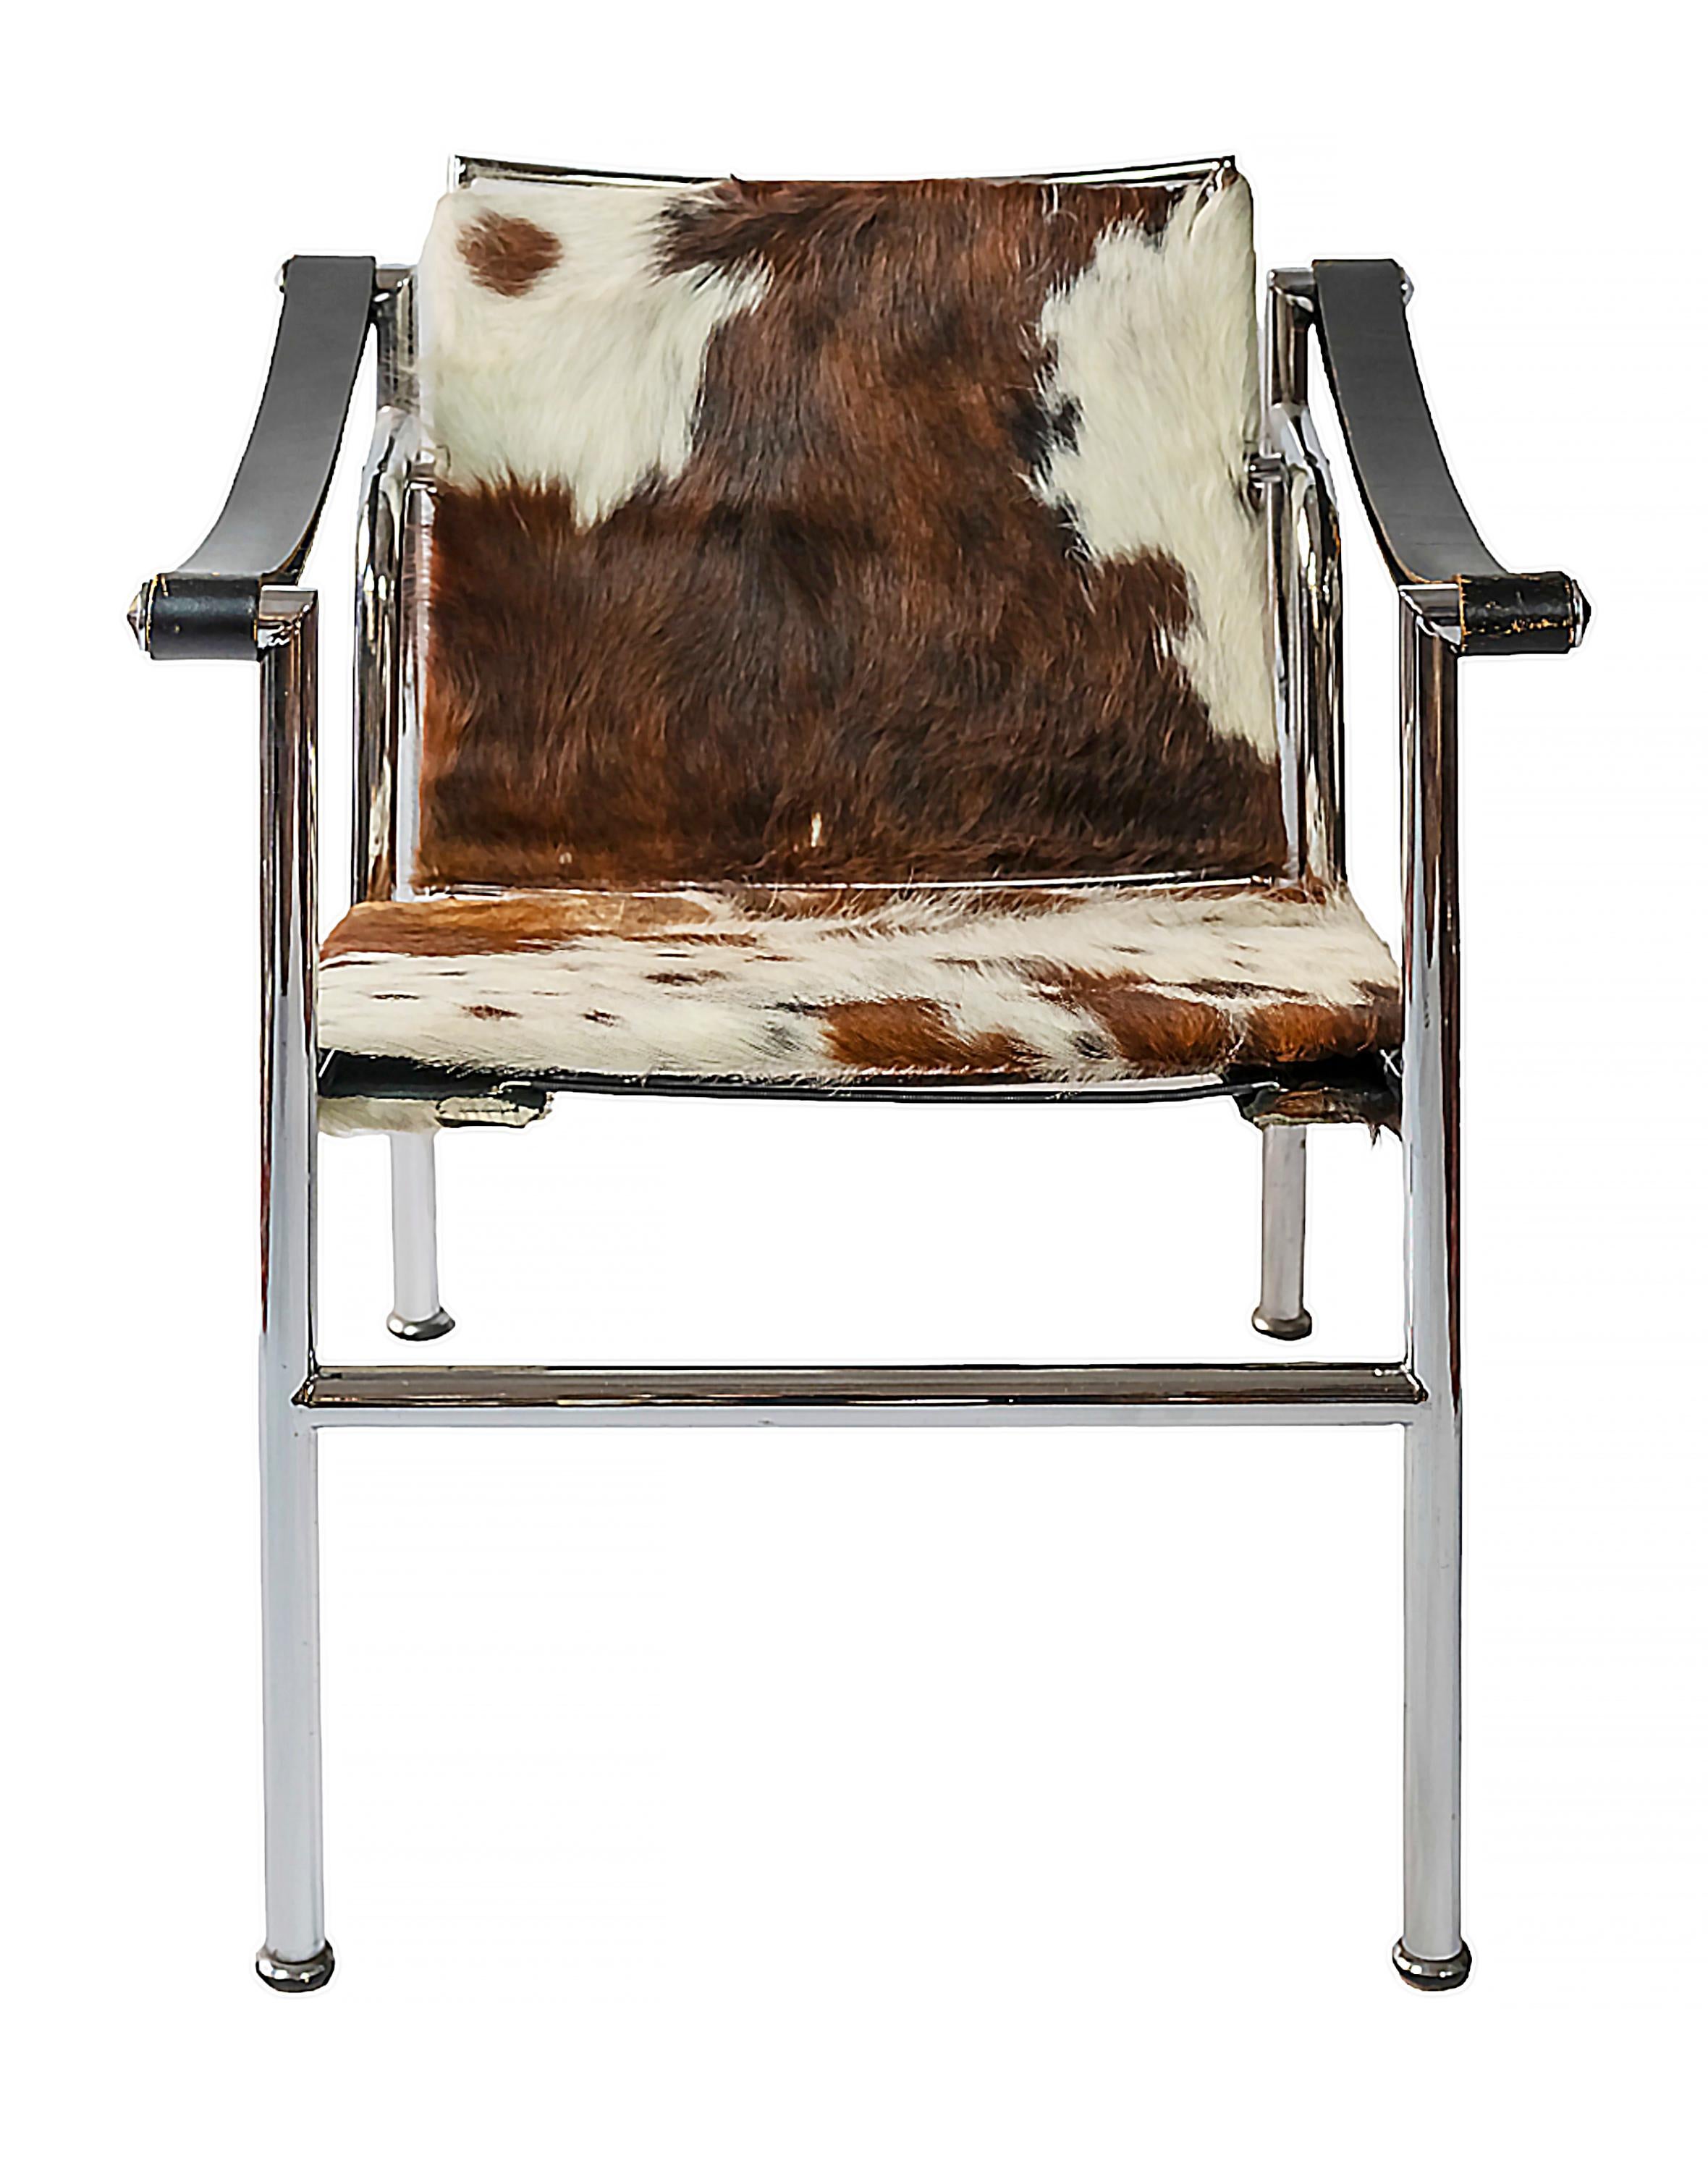 Vintage LC1 chair designed by Le Corbusier, Pierre Jeanneret, Charlotte Perrian, circa 1928.
Base in chromed tubular steel, fur upholstery. 
Marked on the frame: LC1 22580. Labeled: Cassina.
Good vintage condition.

 

 